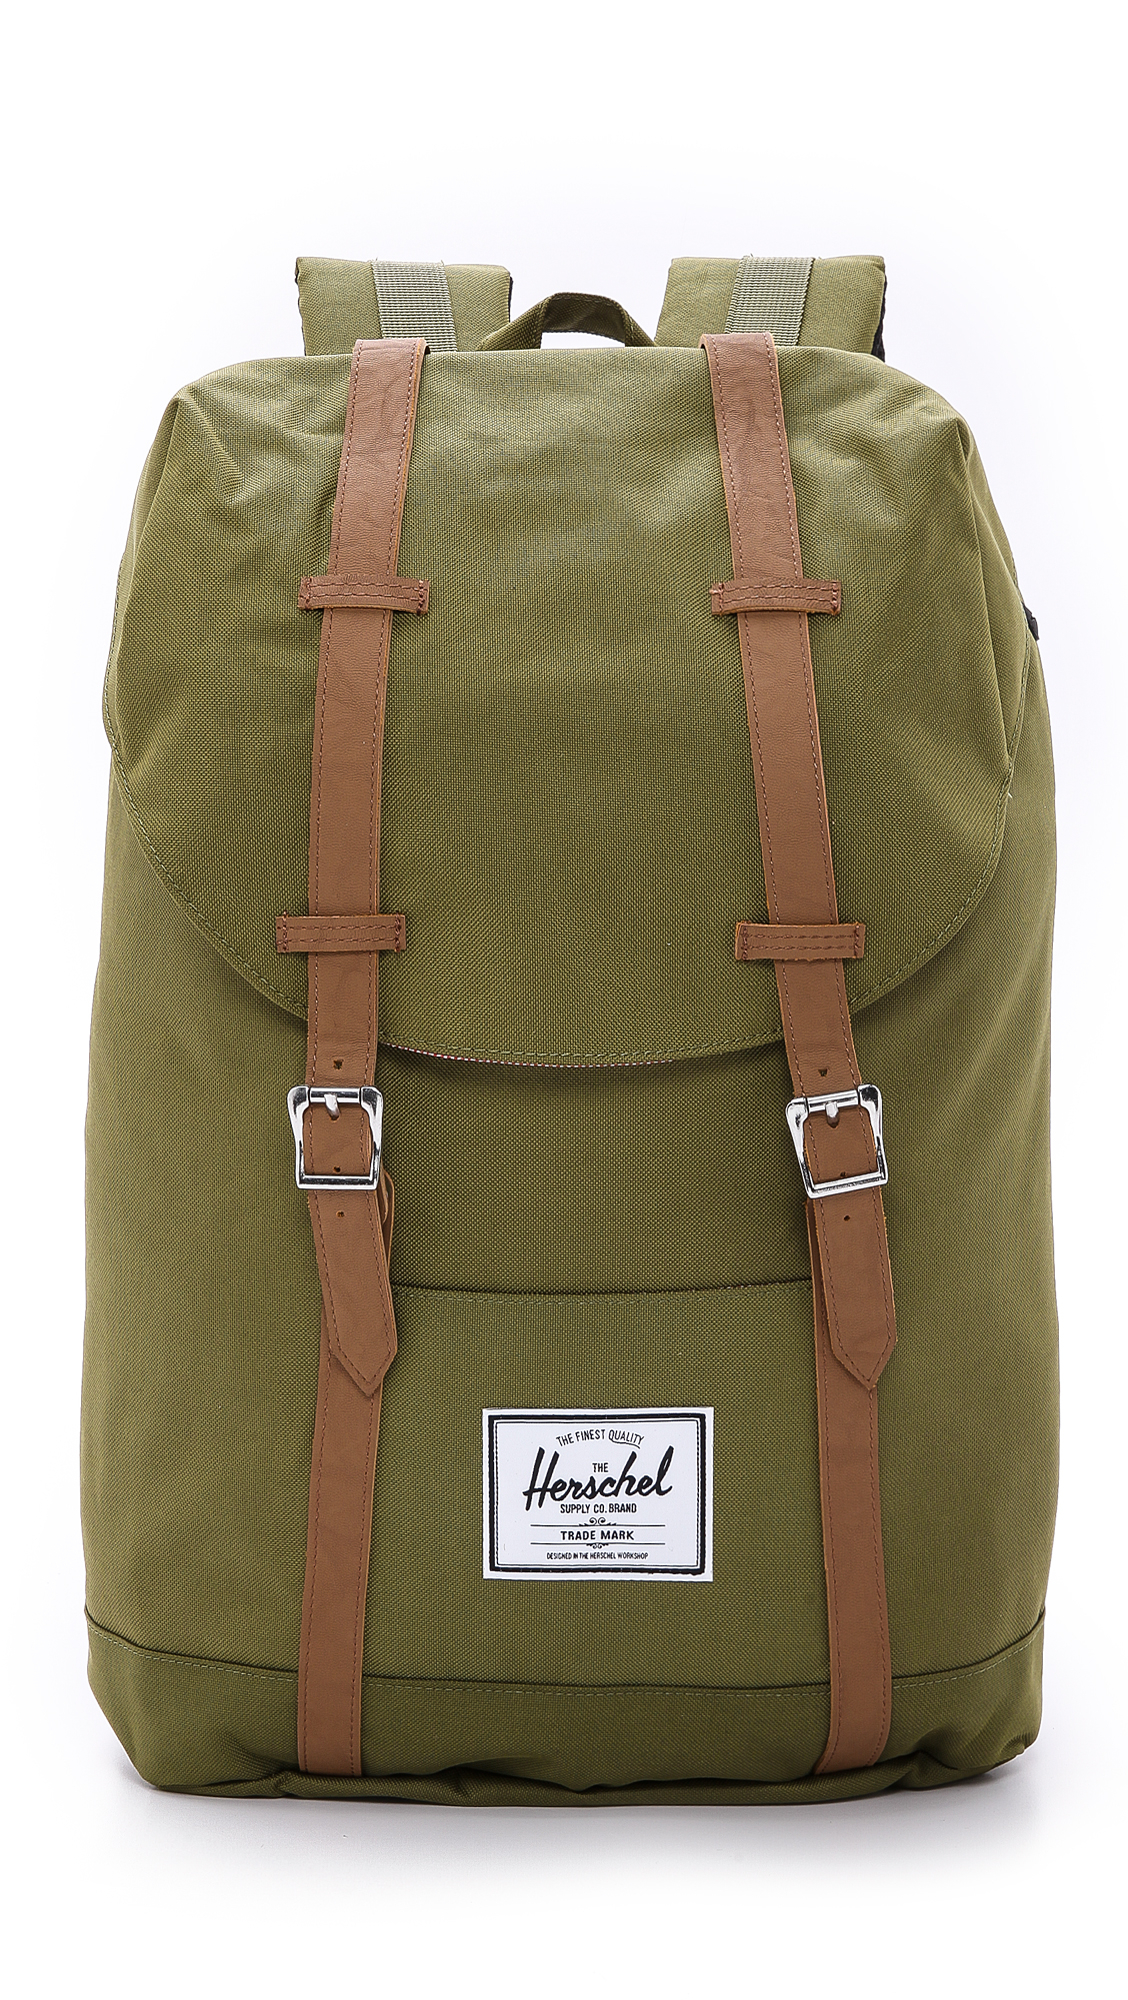 Herschel Supply Co. Retreat Backpack in Army (Green) for Men - Lyst